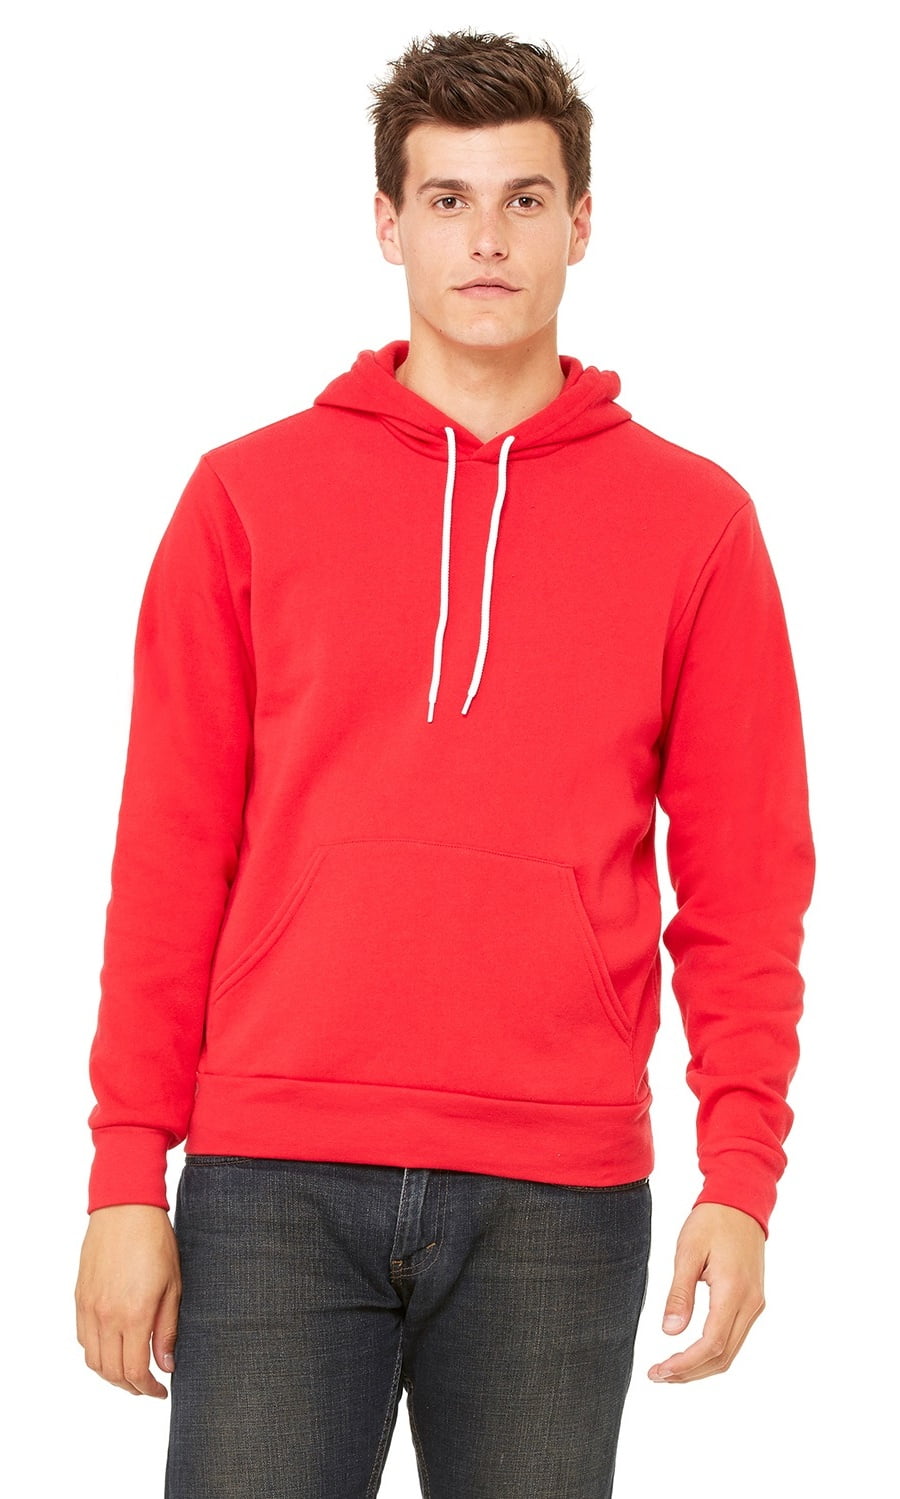 The Bella + Canvas Unisex Poly-Cotton Fleece Pullover Hoodie - RED - XL ...